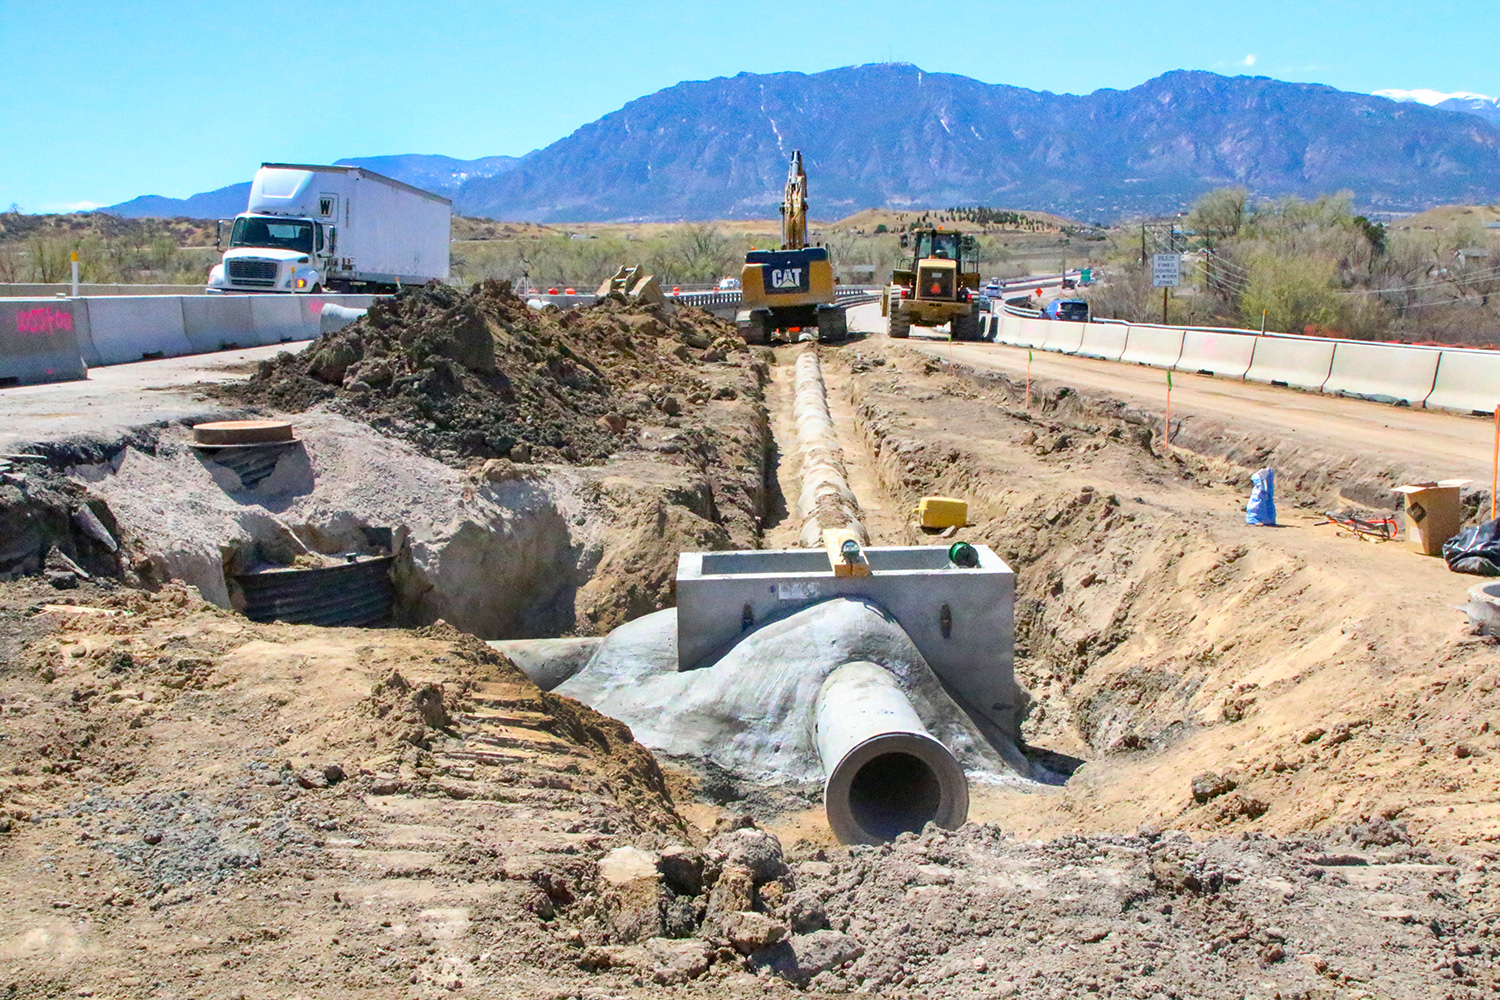 New drainage pipe S Academy Blvd median_sm.jpg detail image